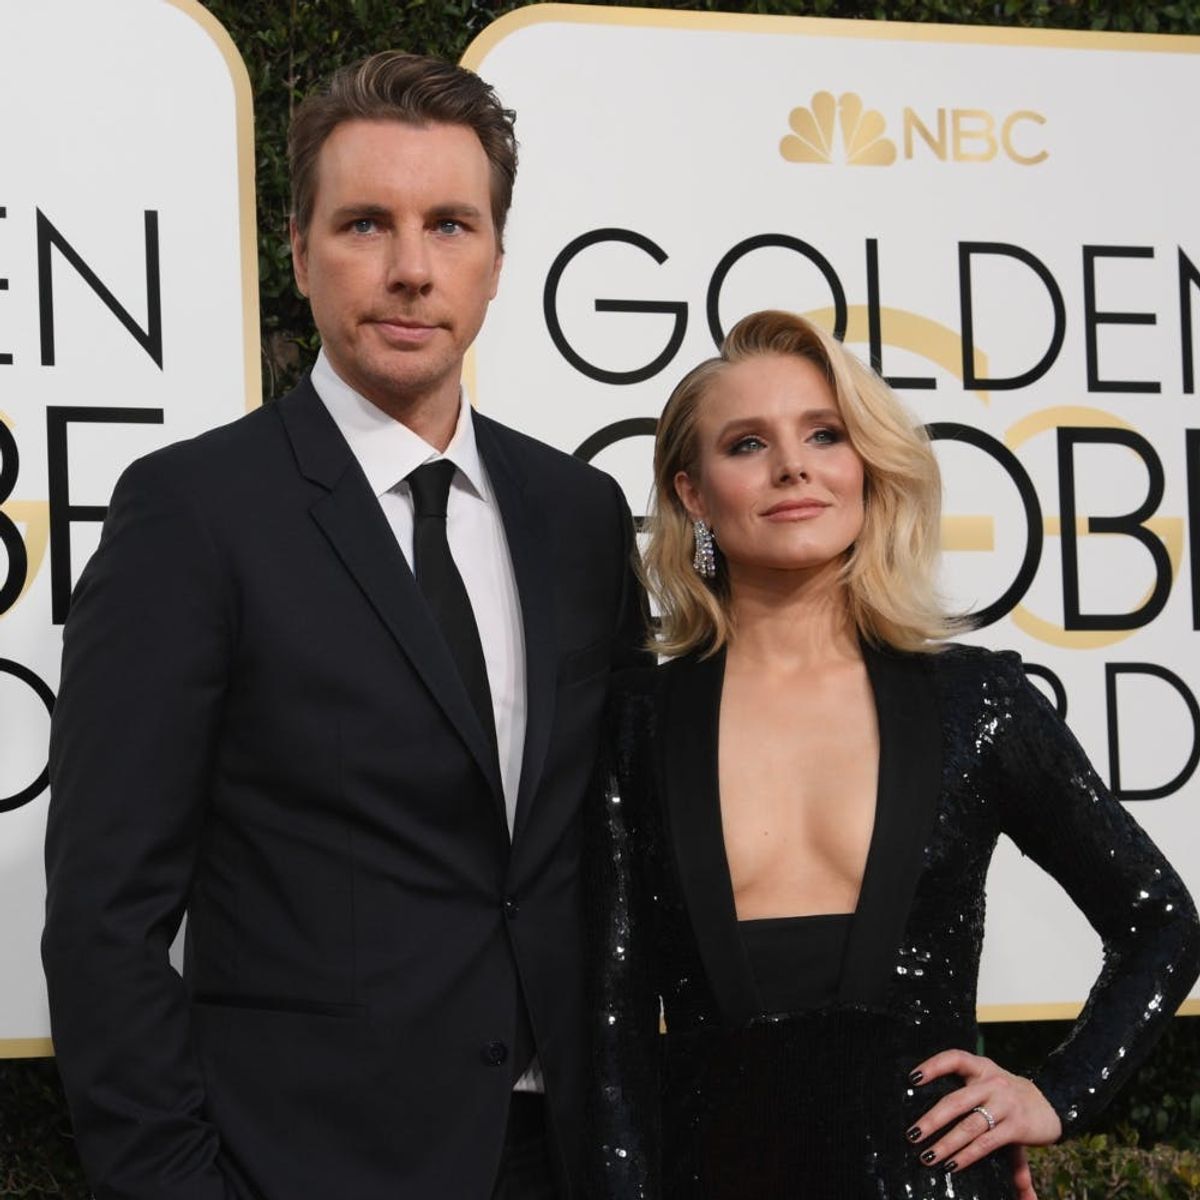 You Won’t Believe What Kristen Bell and Dax Shepard Did After the Golden Globes